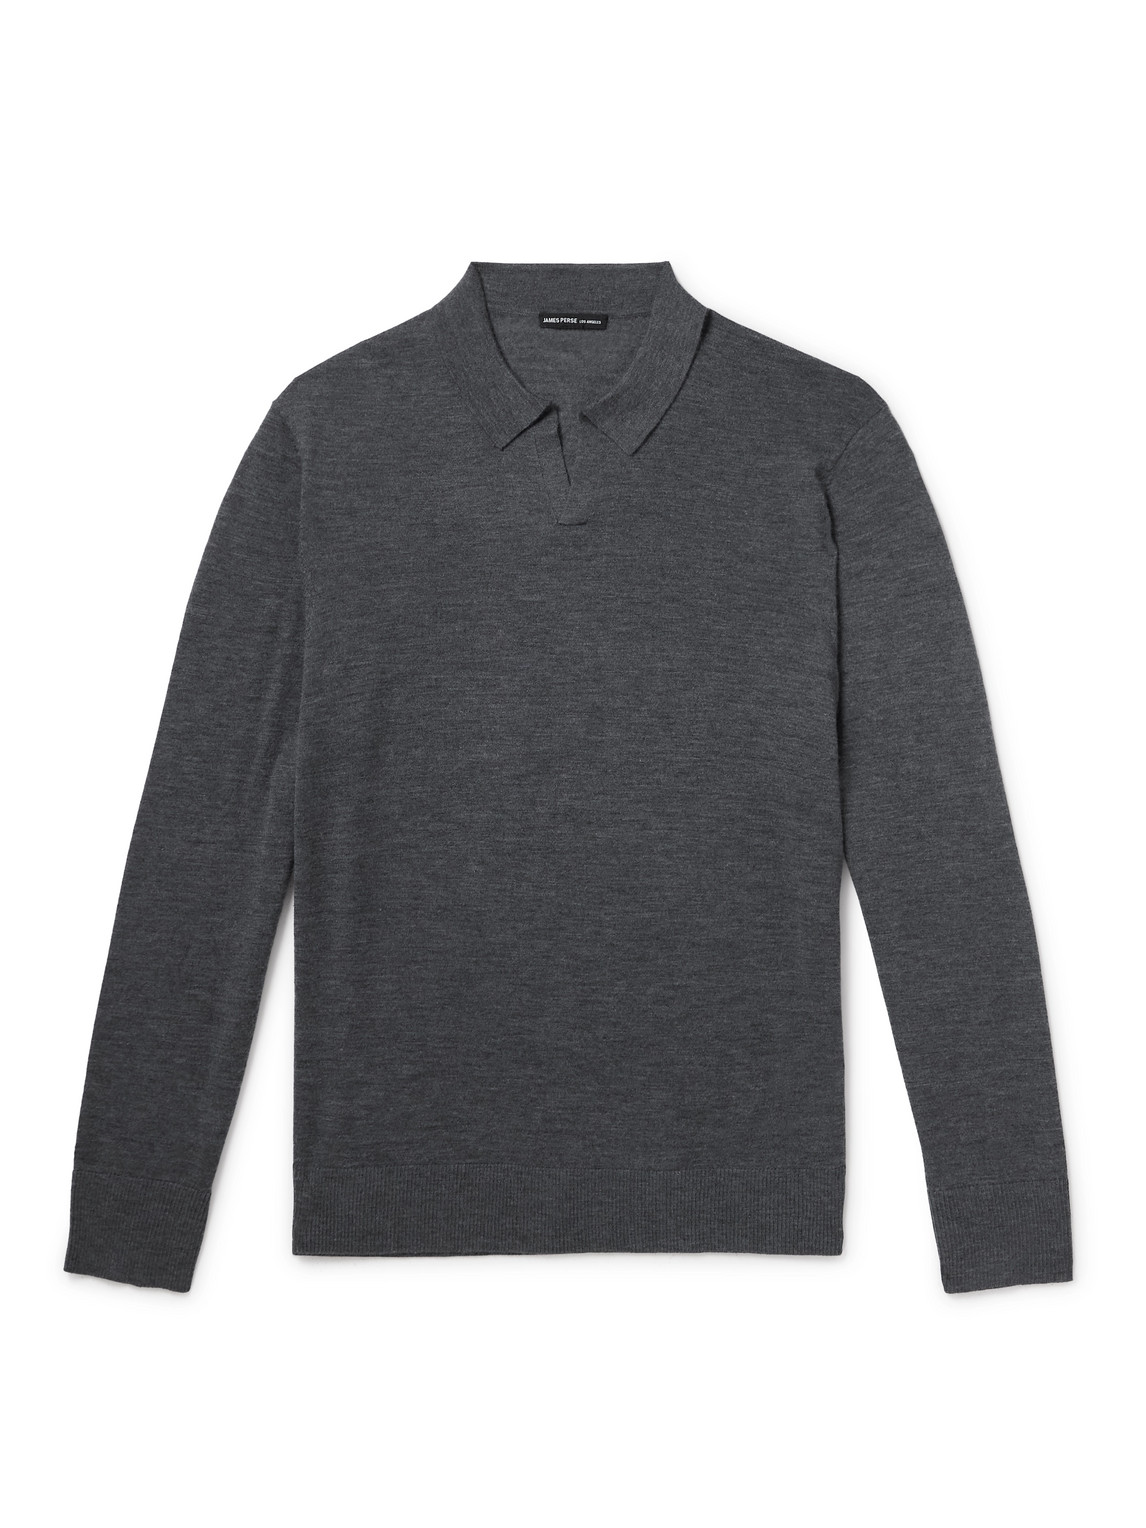 James Perse Cashmere Polo Shirt In Gray